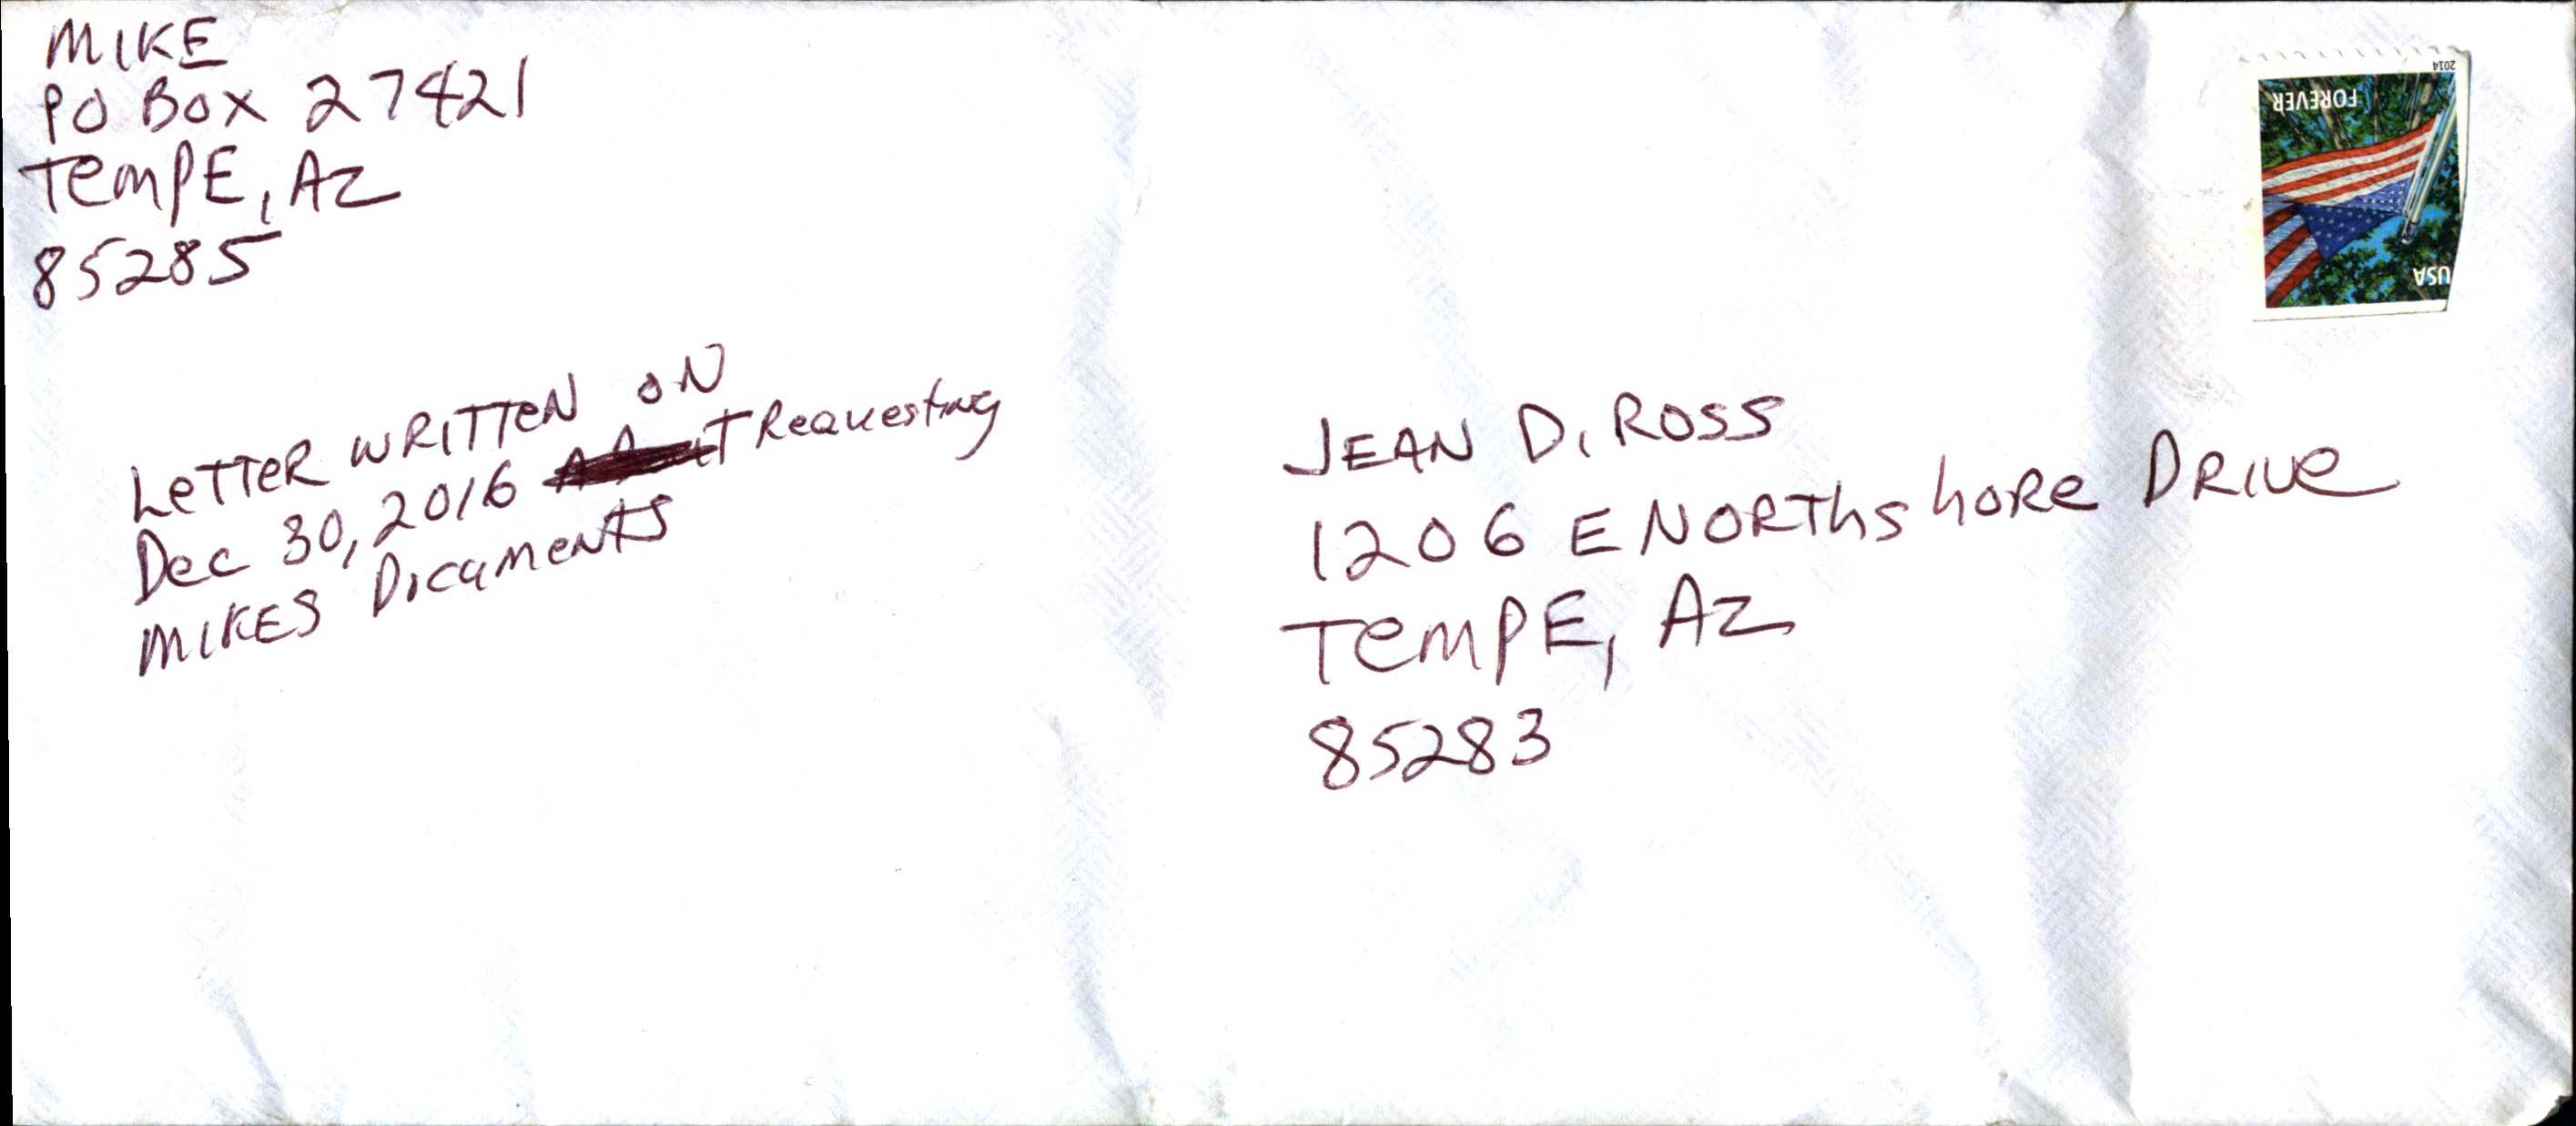 Mailed Sat Dec 31, 2016 letter to Jean